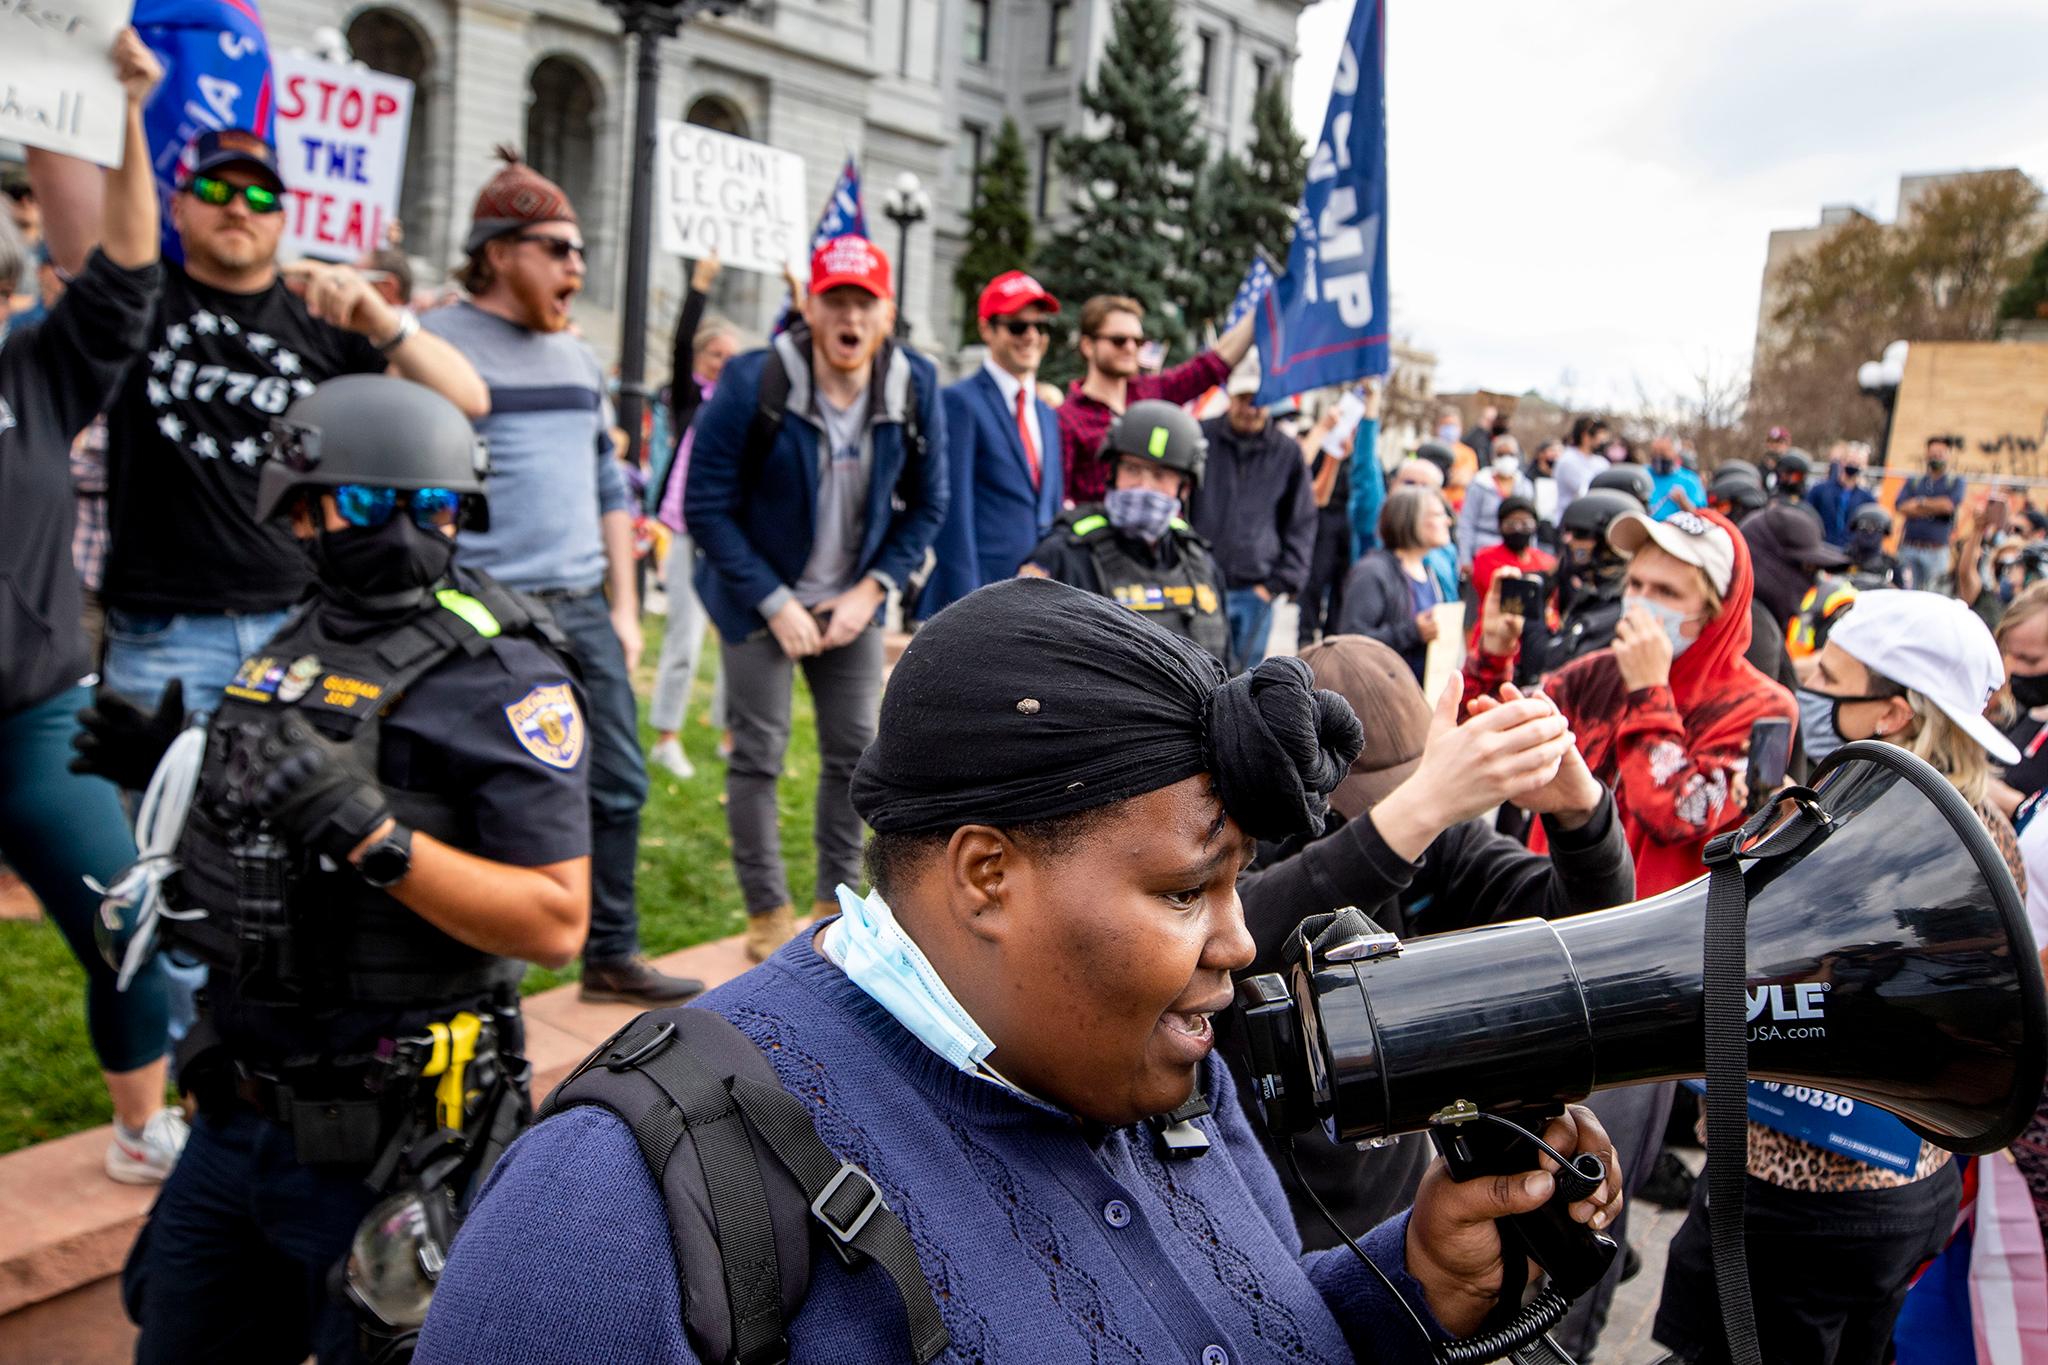 Iris Butler attempts to lead chants among supporters of Joe Biden as state police stand between them and supporters of Donald Trump at the Capitol. Nov. 7, 2020.